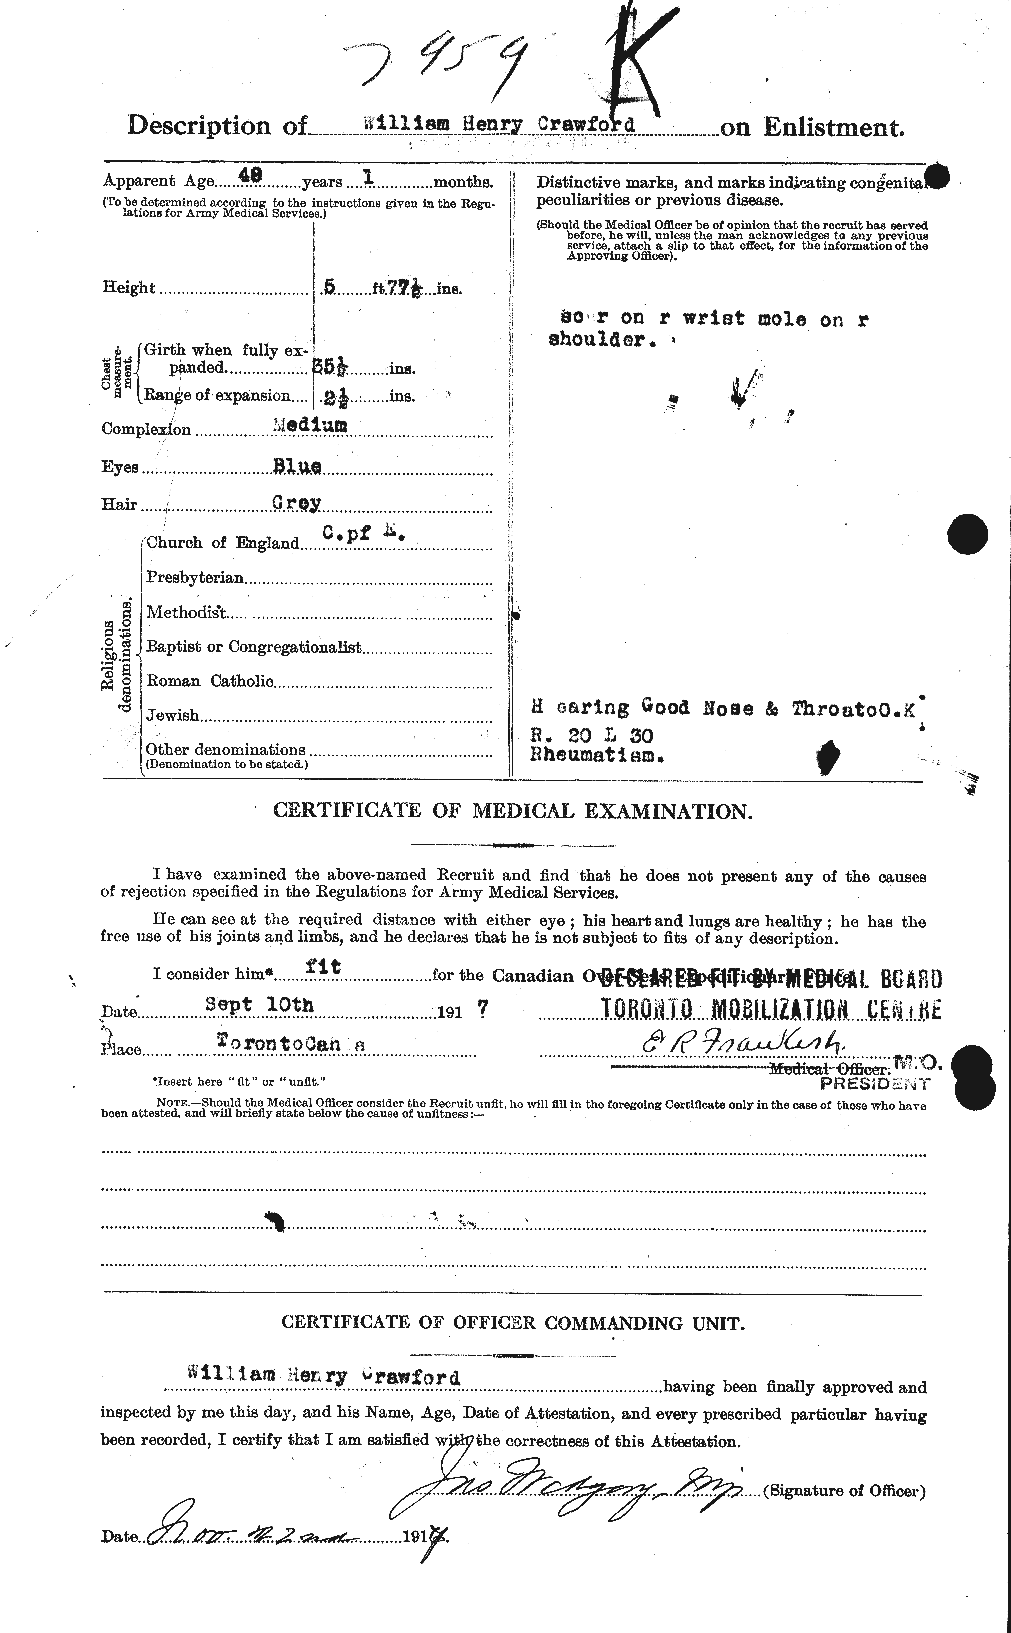 Personnel Records of the First World War - CEF 061137b